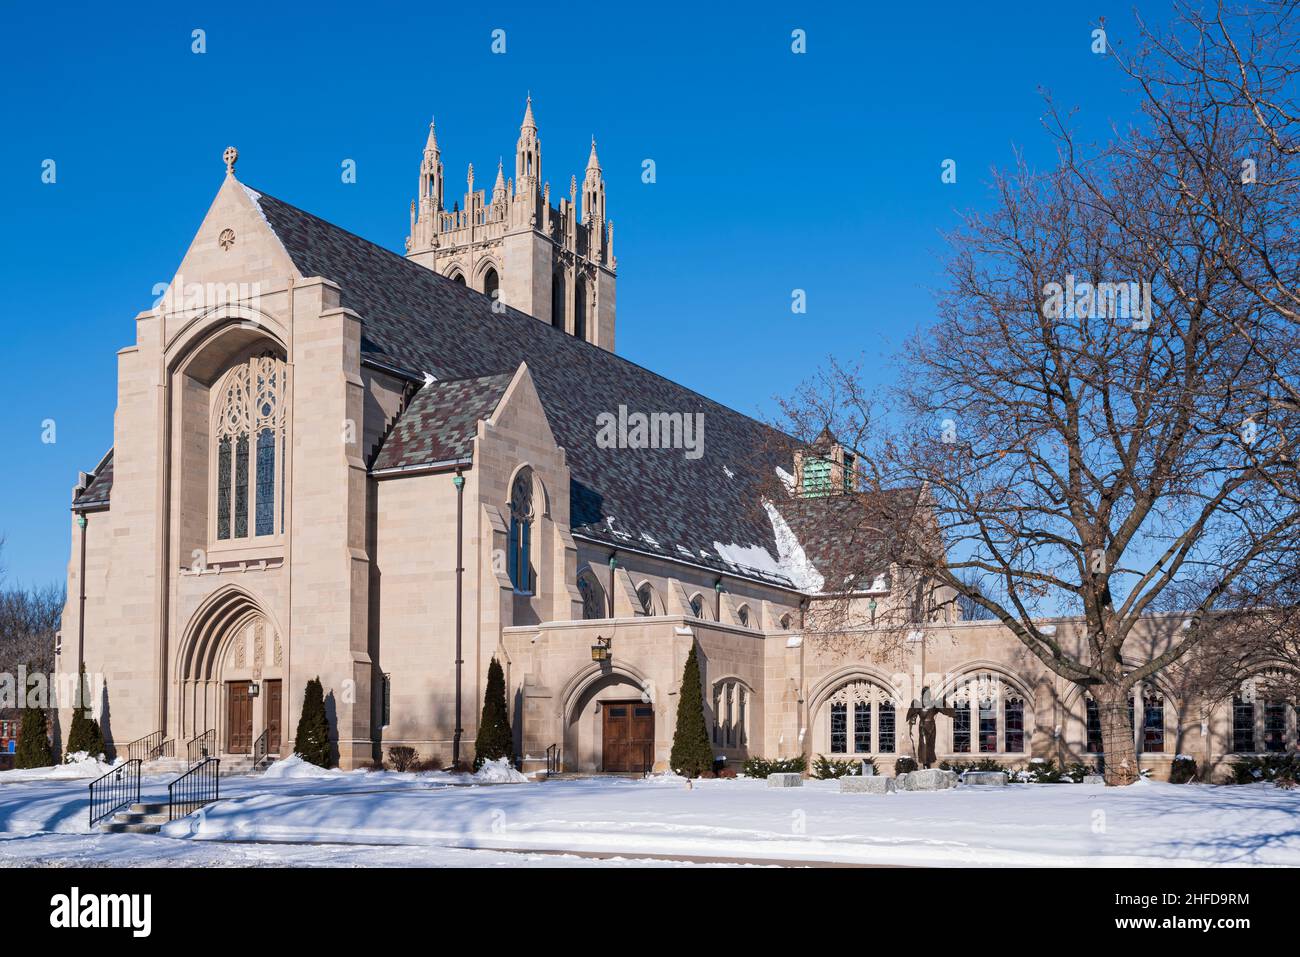 historic neo-gothic style church in hill district of saint paul minnesota Stock Photo